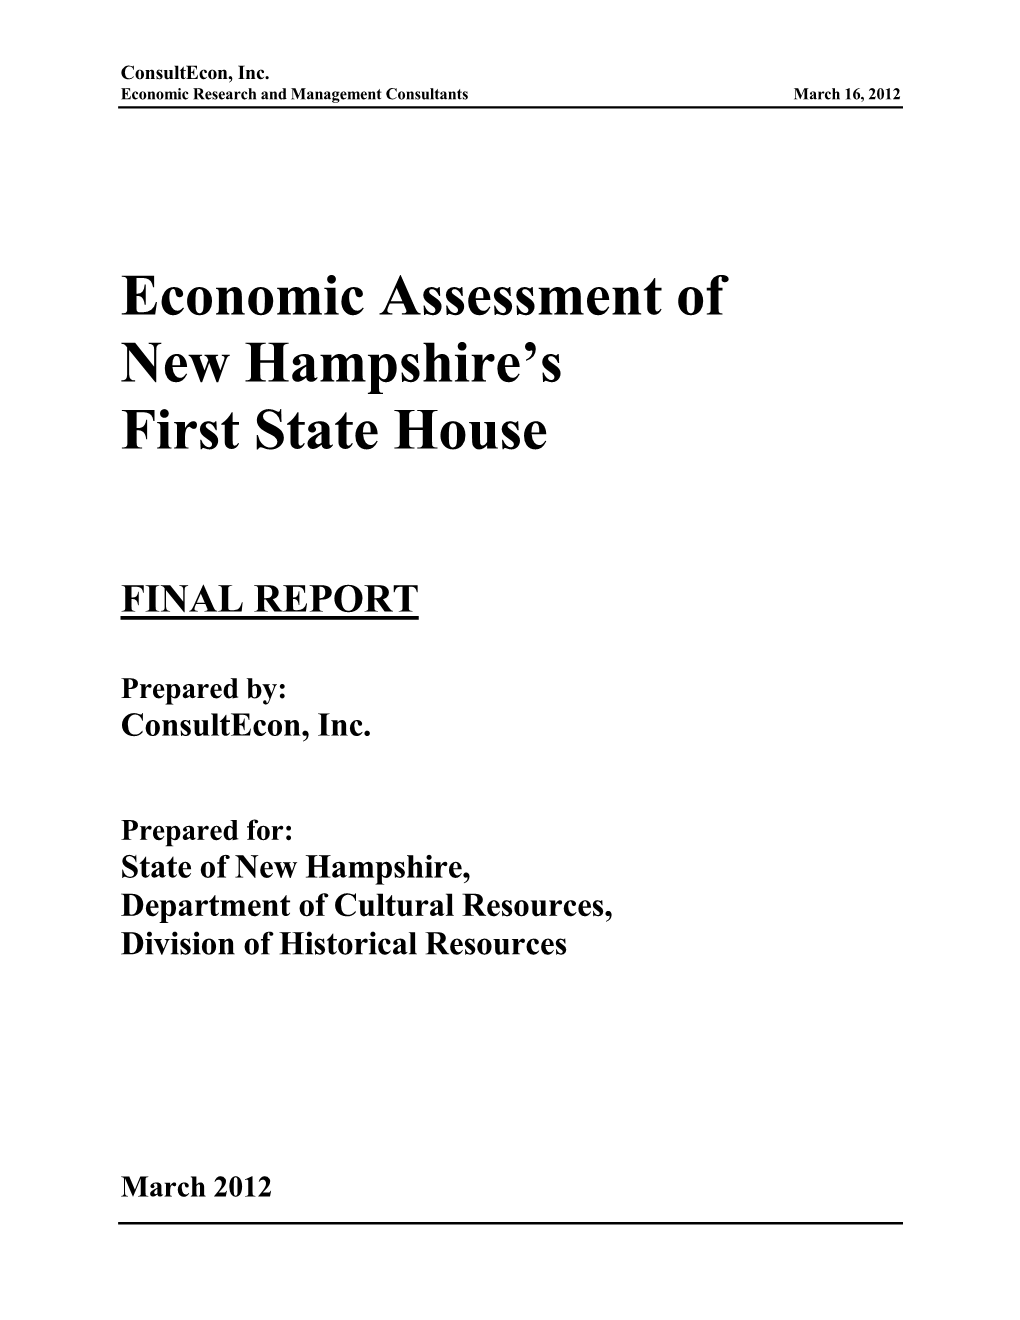 To See the Economic Assessment